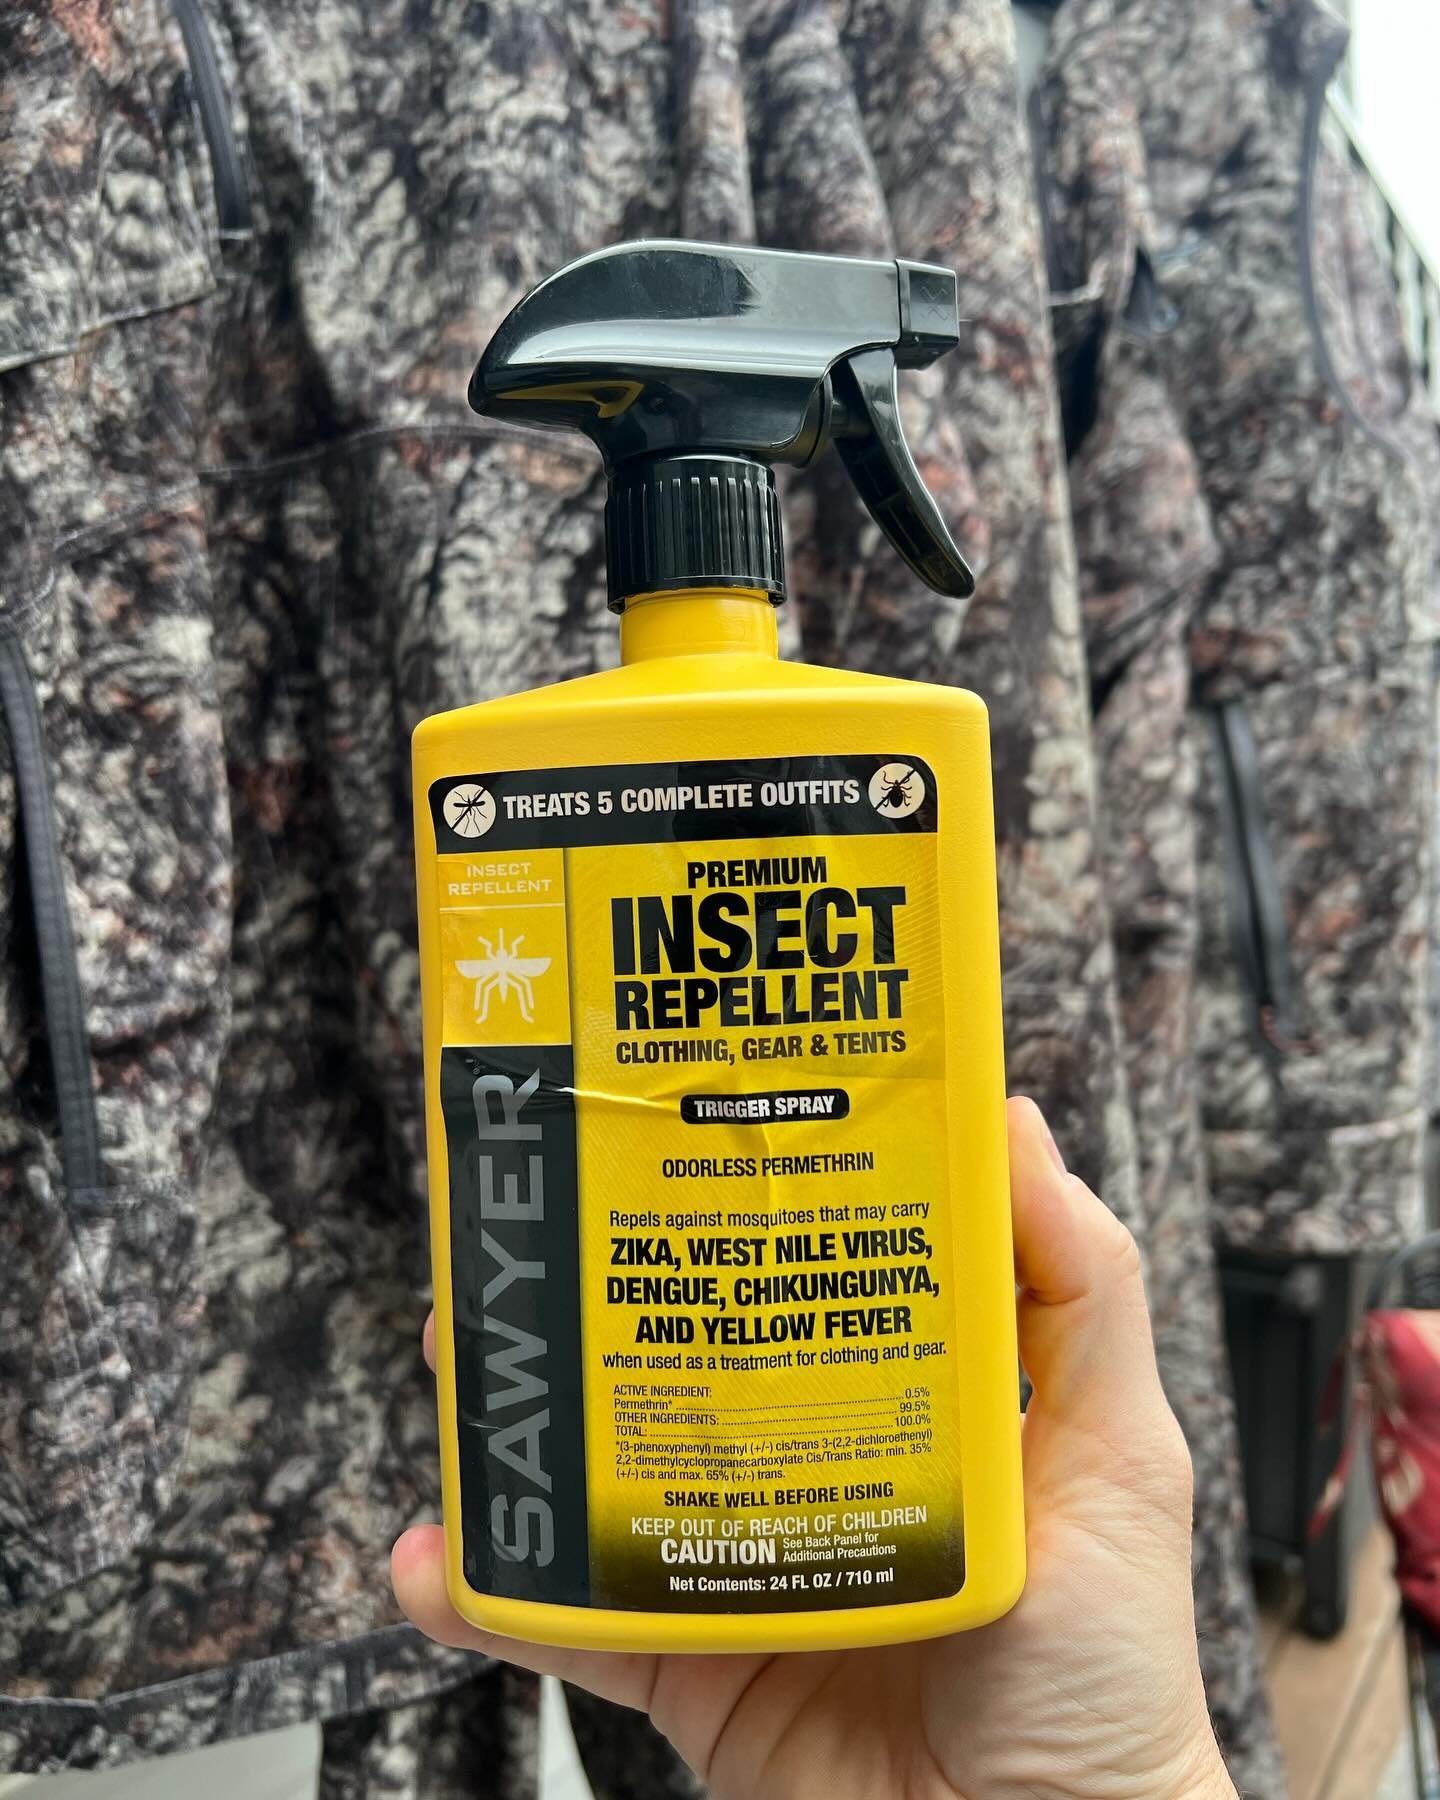 🚨 Here&rsquo;s your reminder to spray your outdoor clothes for ticks! 🚨 If you enjoy eating red meat, staying healthy, and don&rsquo;t like digging ticks out of bodily crevices, don&rsquo;t take a chance! Stay tick-free and keep enjoying the great 